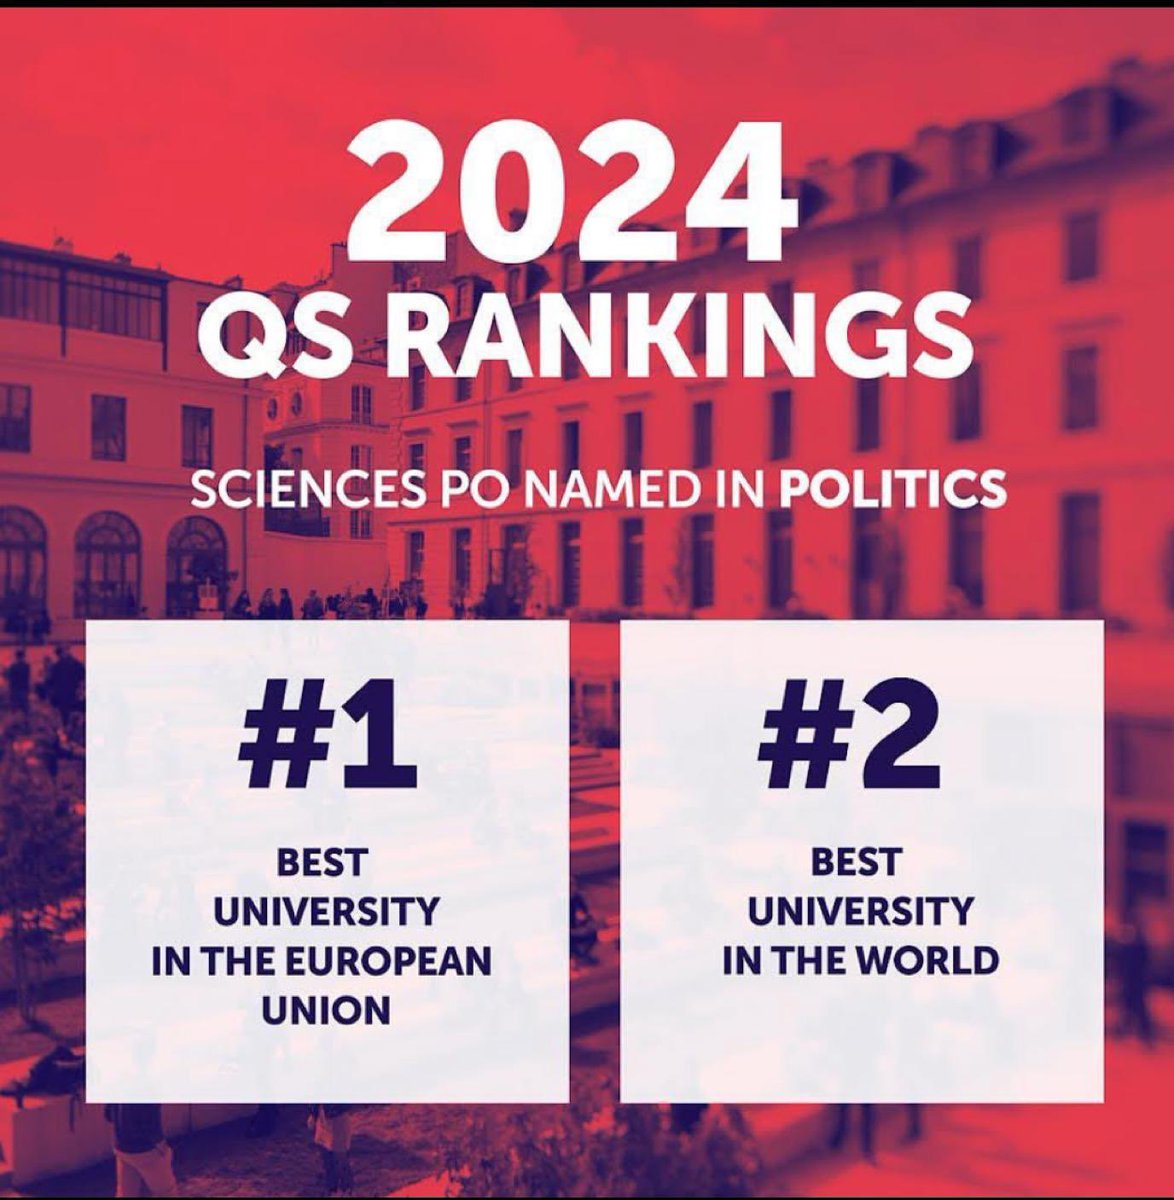 We are proud and humbled A recognition to the excellence of students, faculty, researchers and staff of @sciencespo 👇